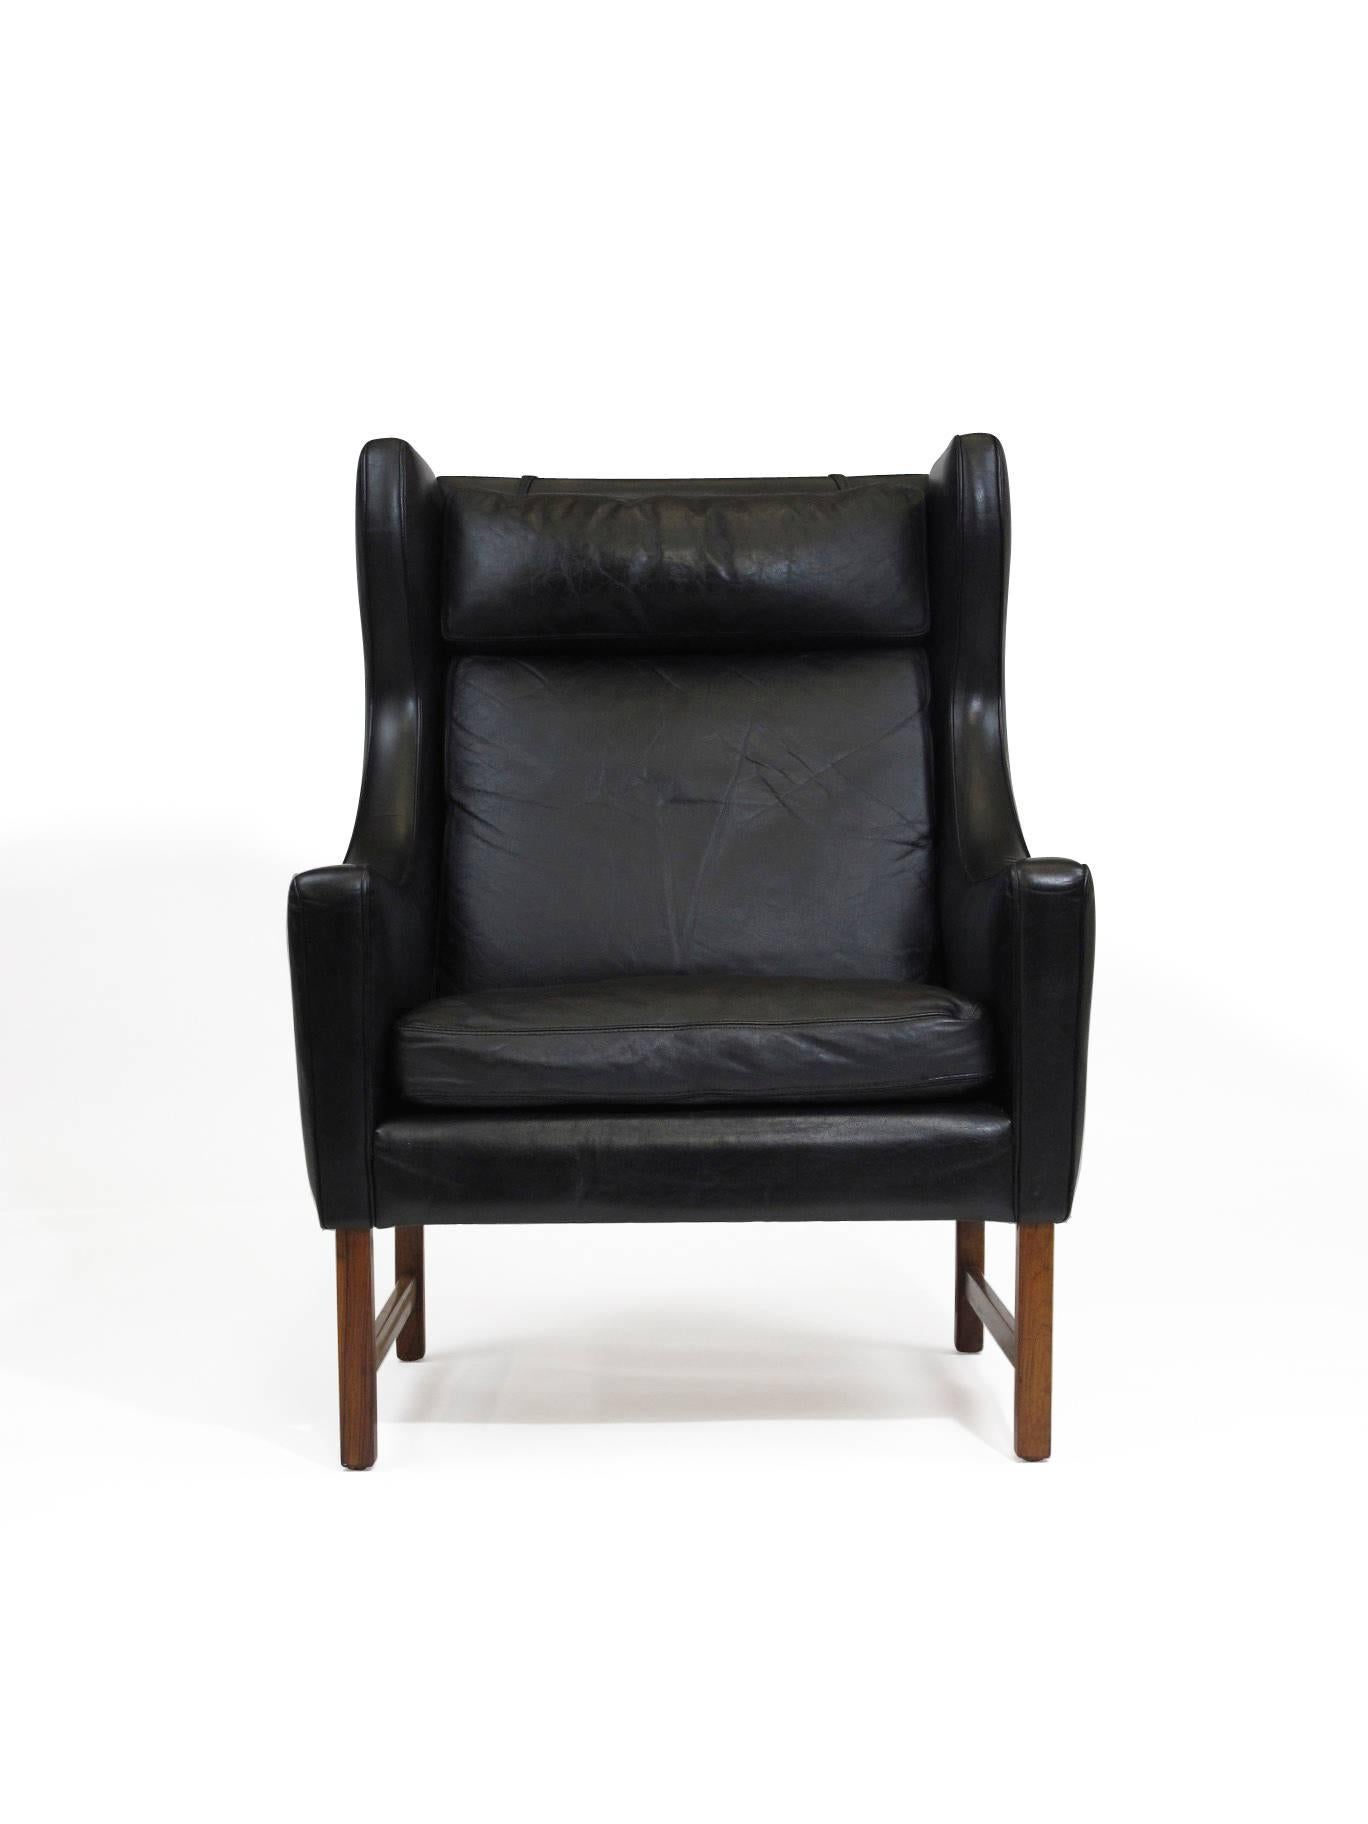 Midcentury highback lounge chair designed by Fredrik Kayser for Vatne Møbler, Norway, circa 1964. Solid wood frame upholstered in the original black leather, raised on rosewood legs. Matching ottoman available upon request.
